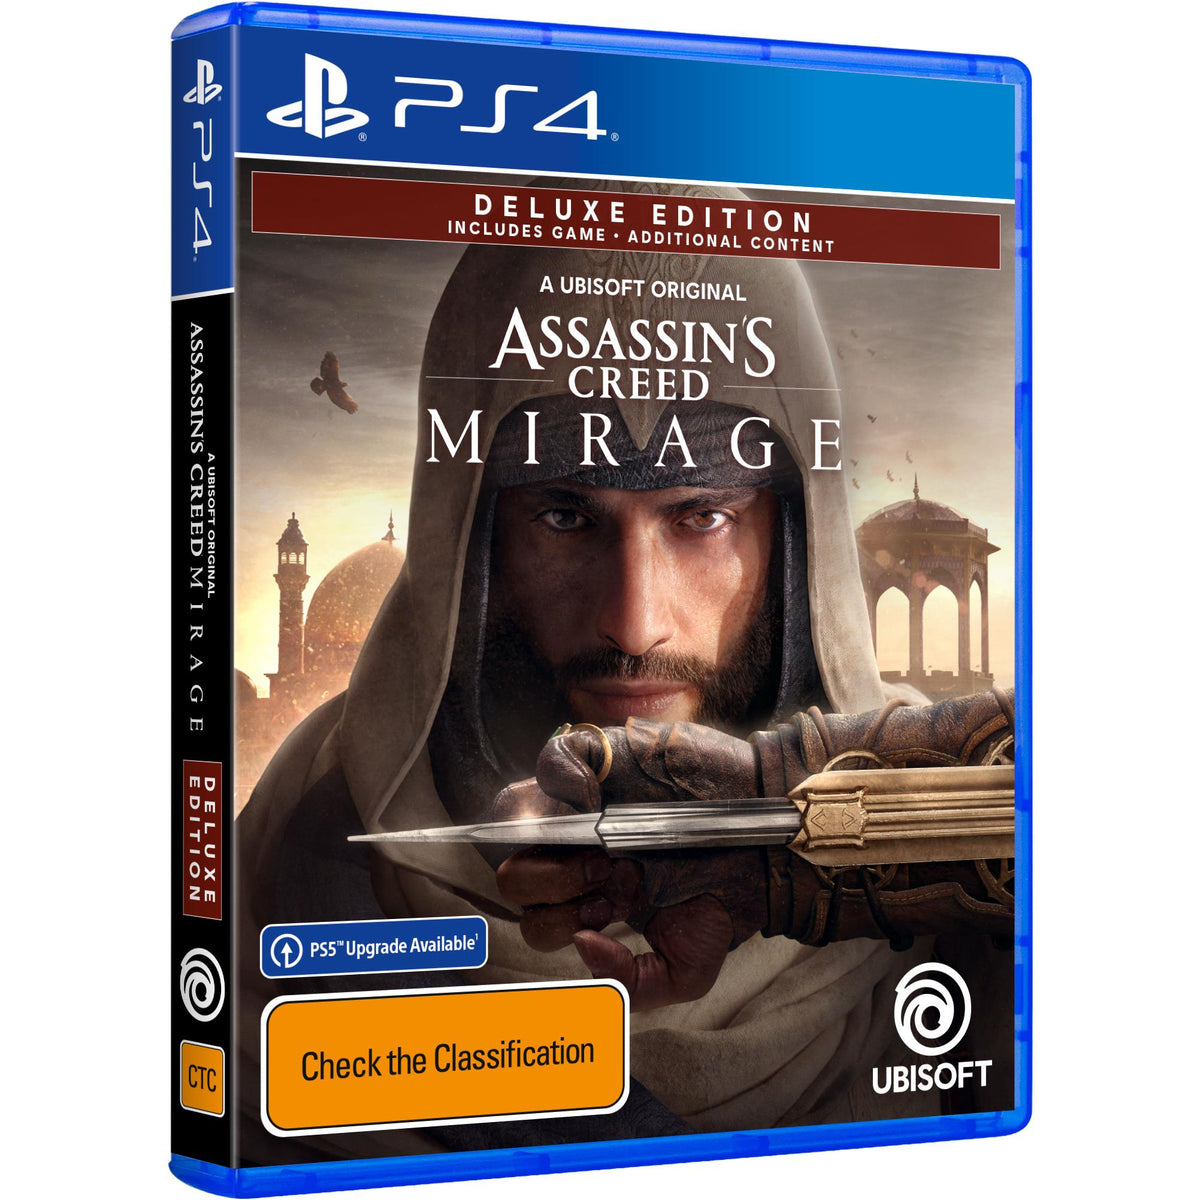 Assassins Creed Mirage Deluxe Edition (PS4)